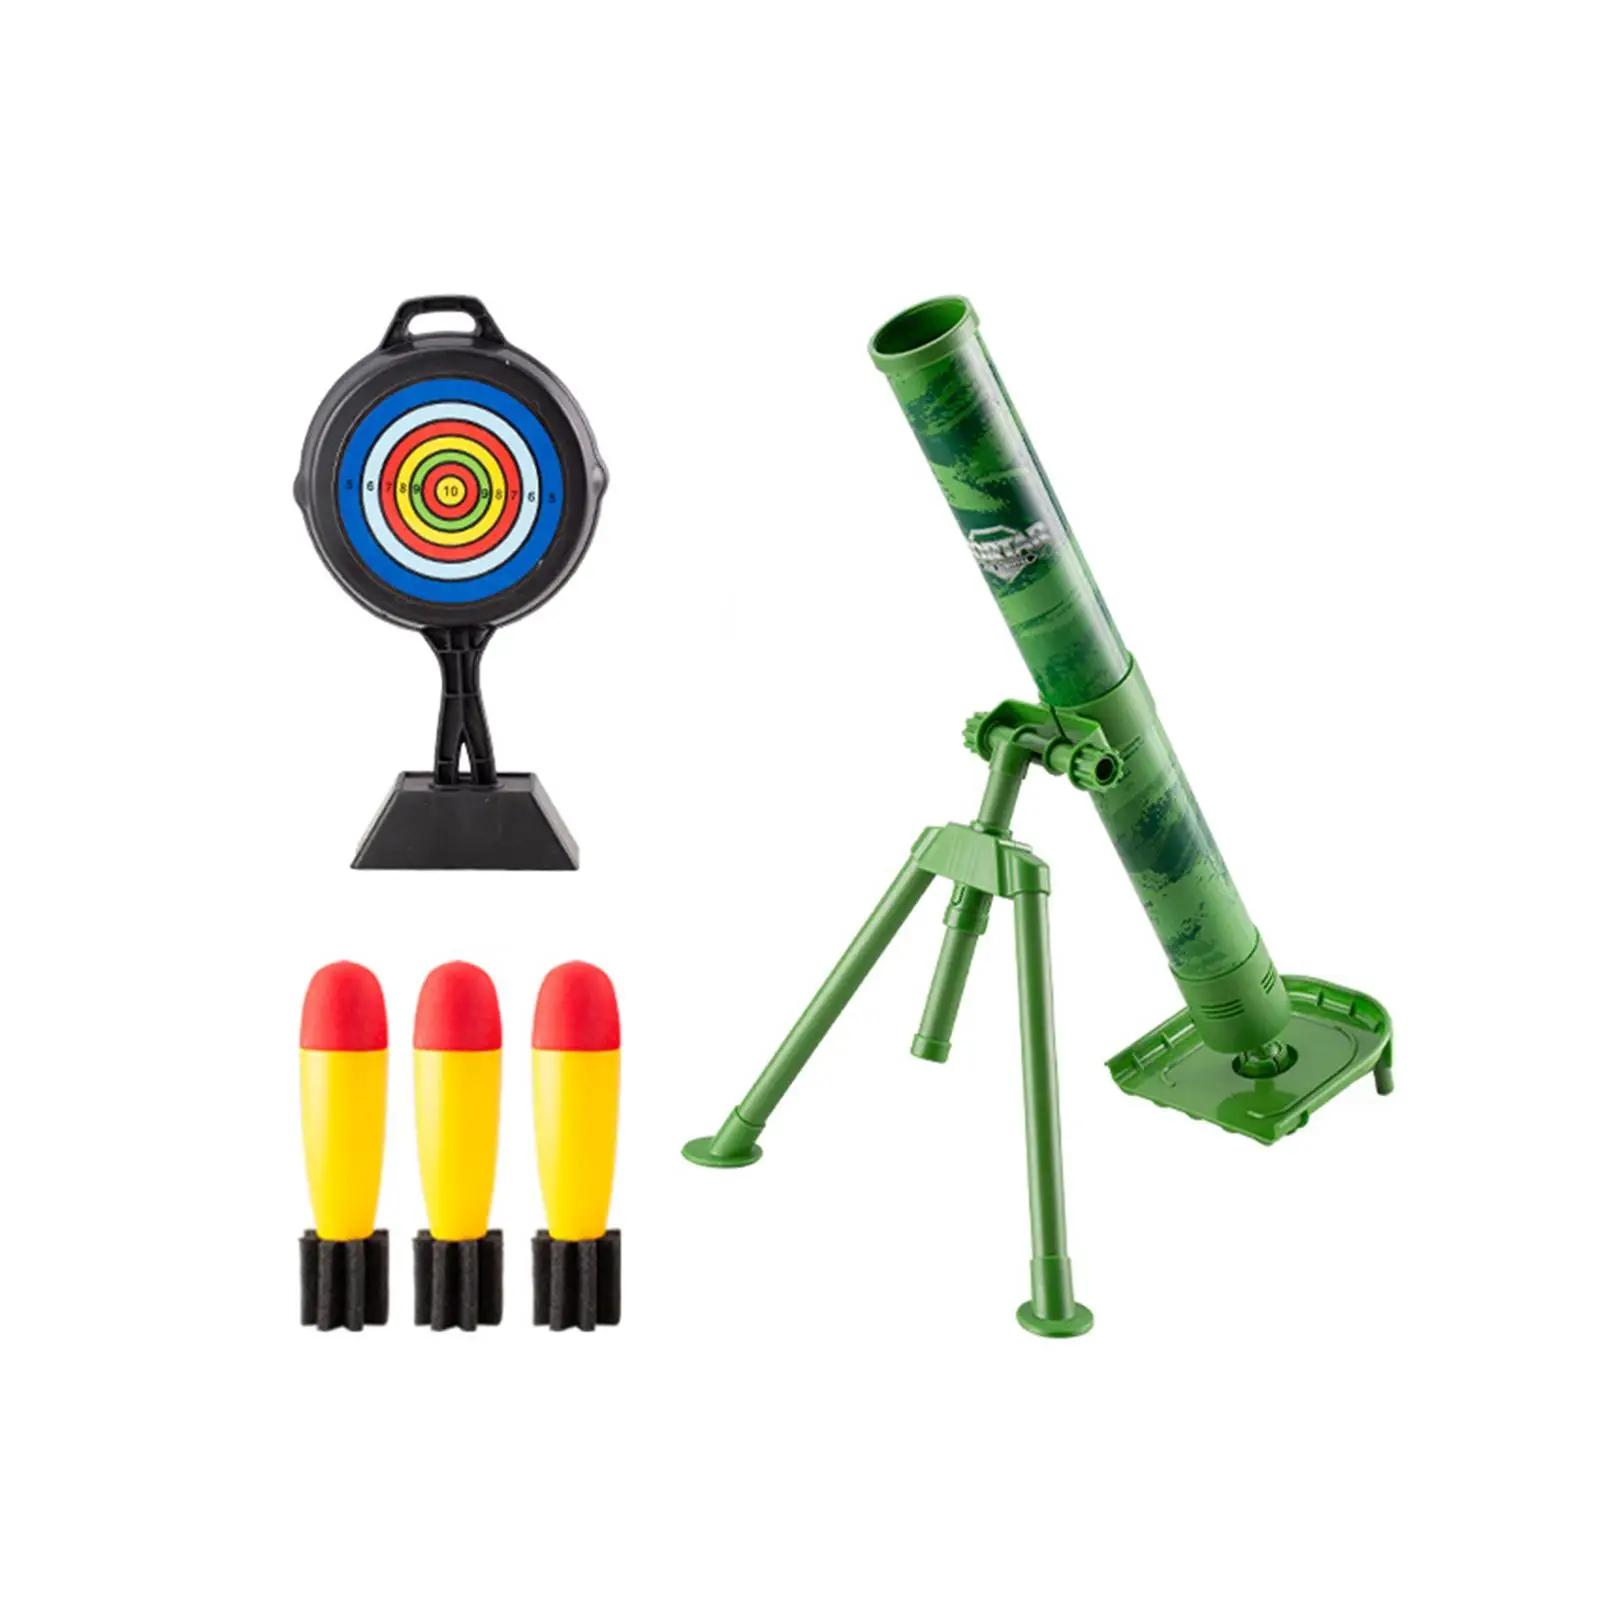 Mortar Launcher Toy Set with Sound Professional Launch Set Rocket Launcher Set Game for Boys and Girls Festival Gifts